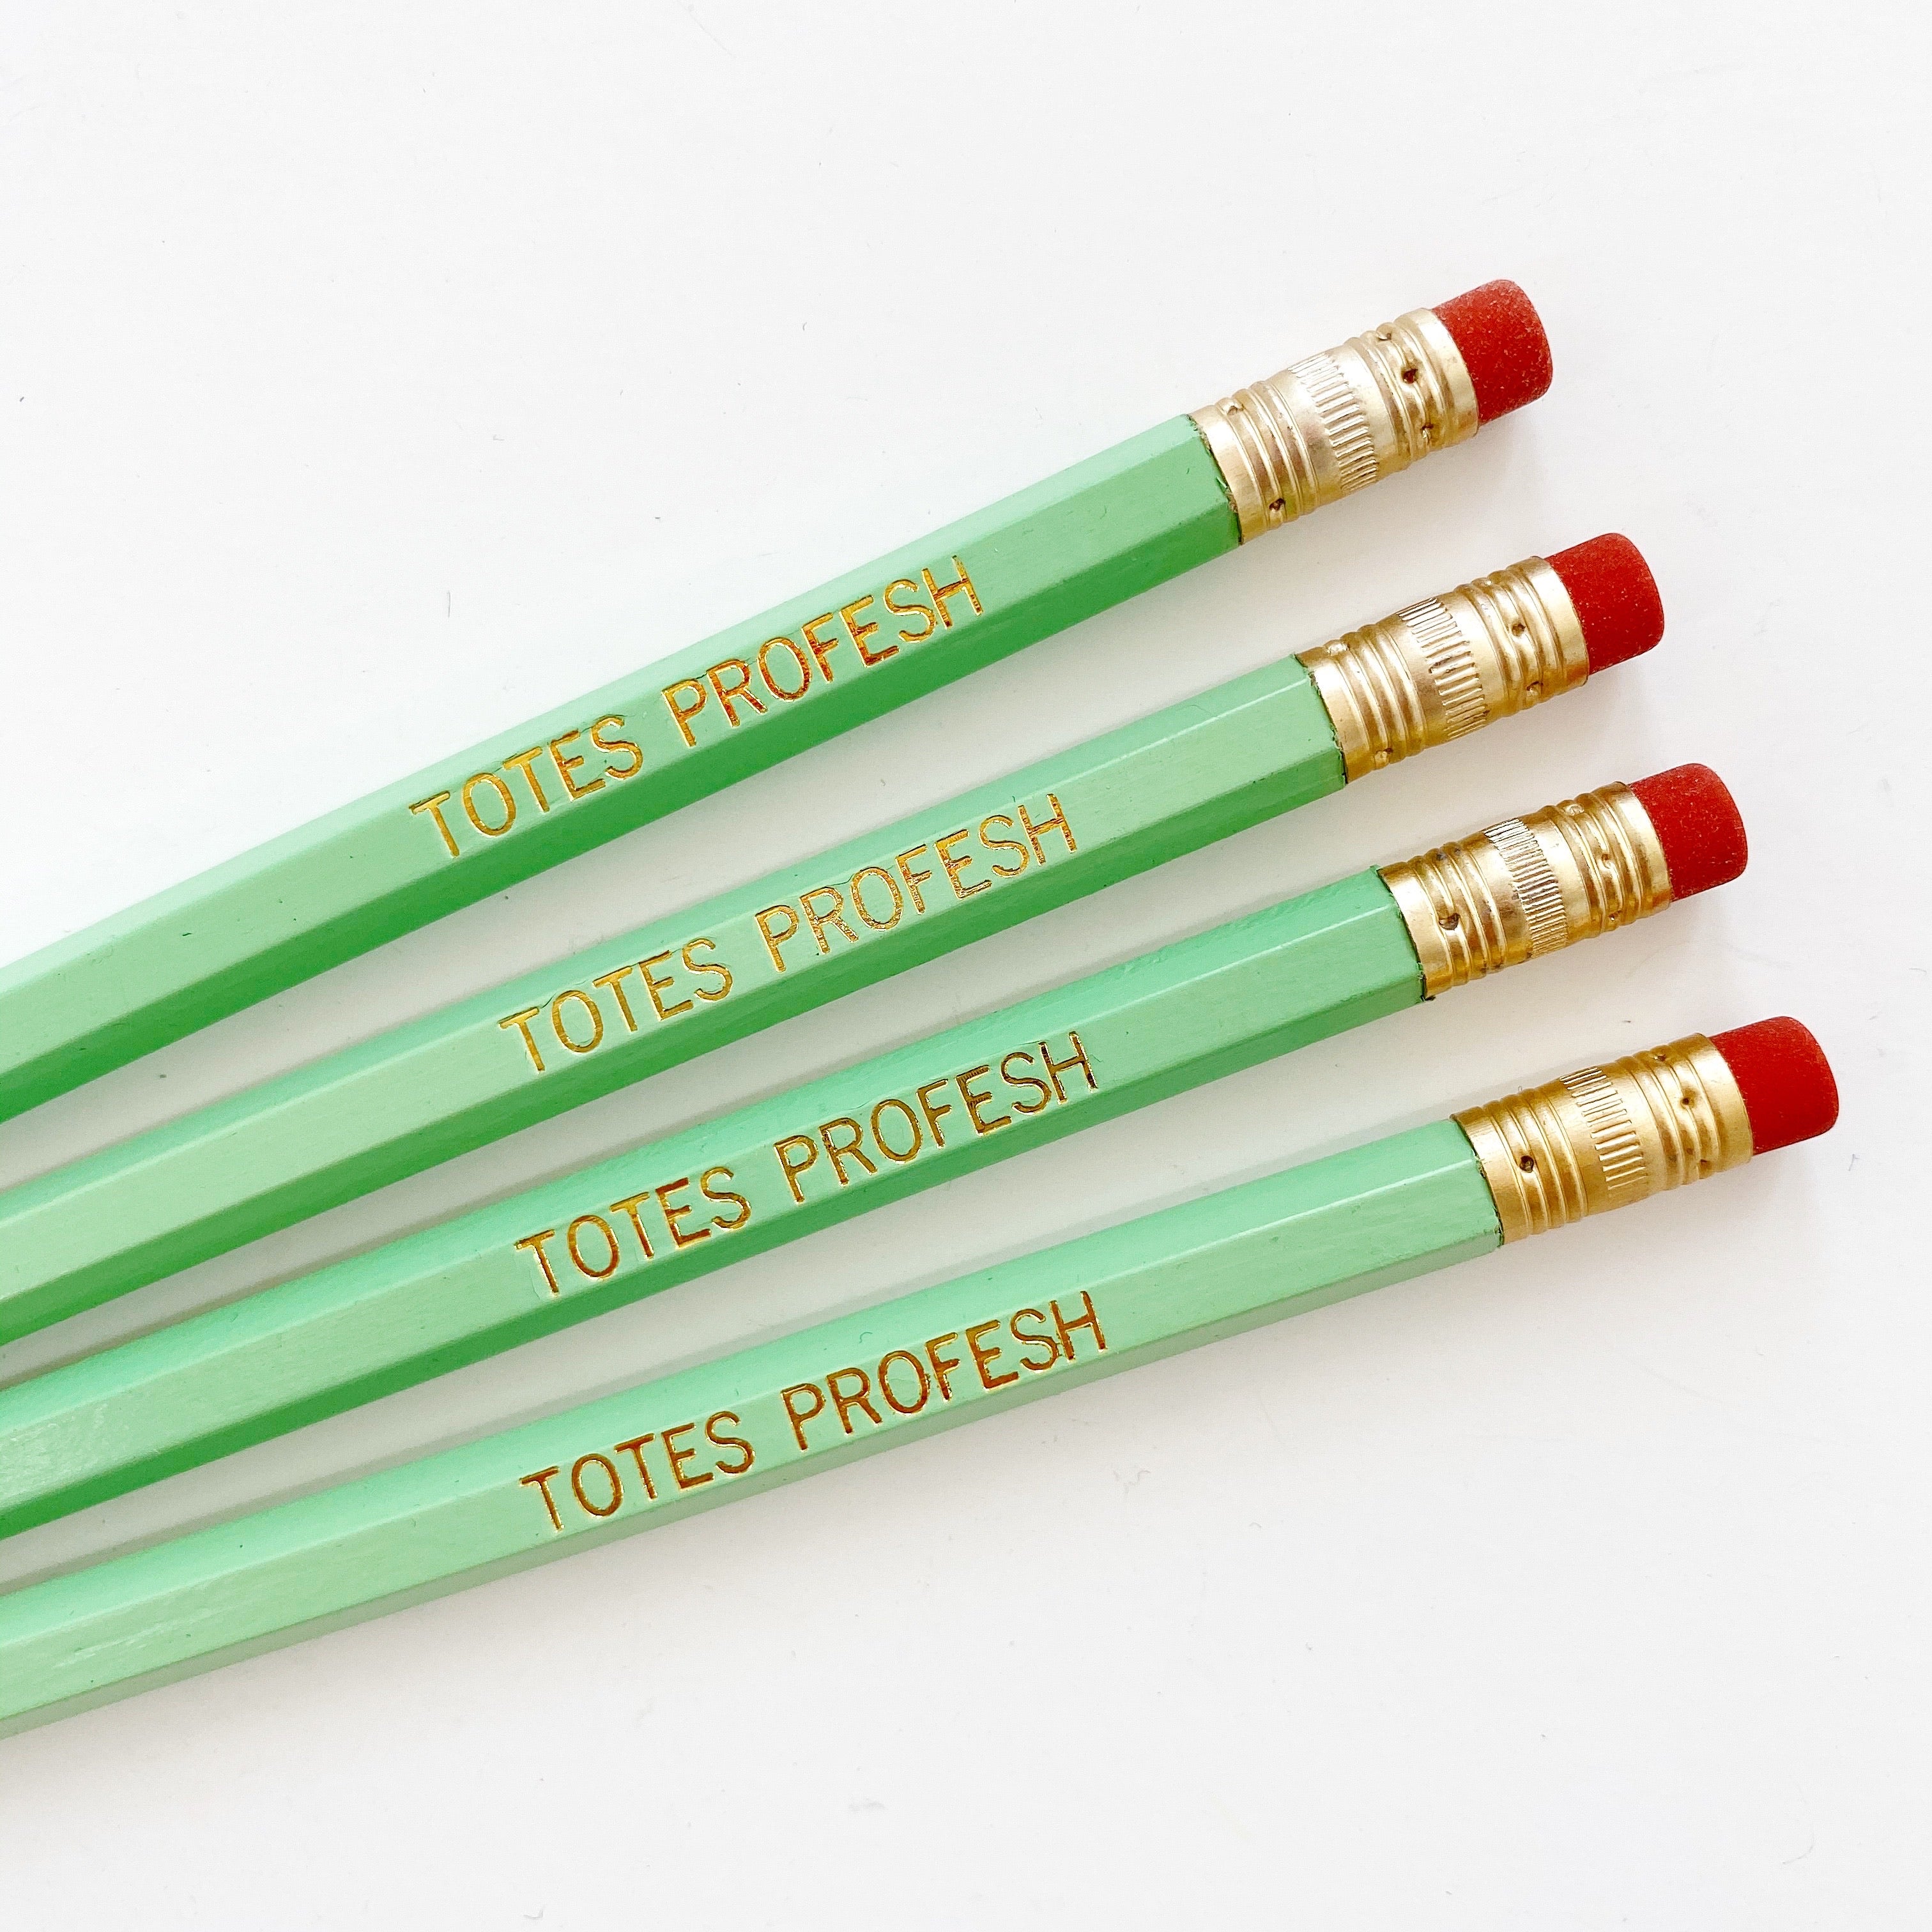 Image of green pencils with gold foil text says, "Totes profess". 